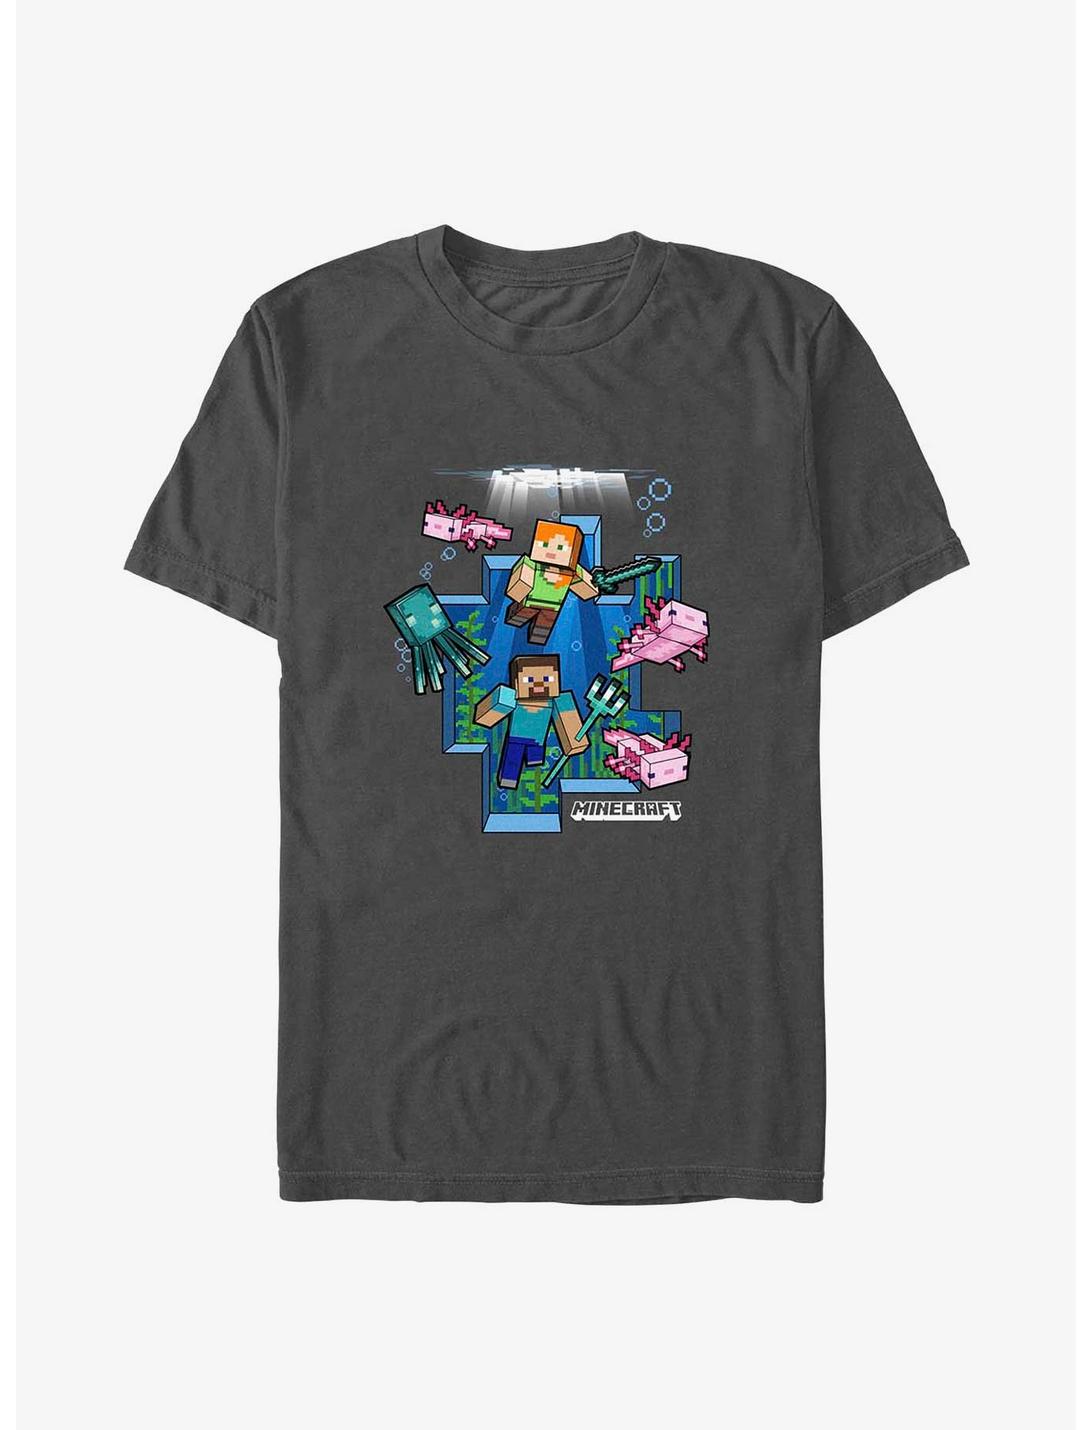 Minecraft Under Water T-Shirt, CHARCOAL, hi-res